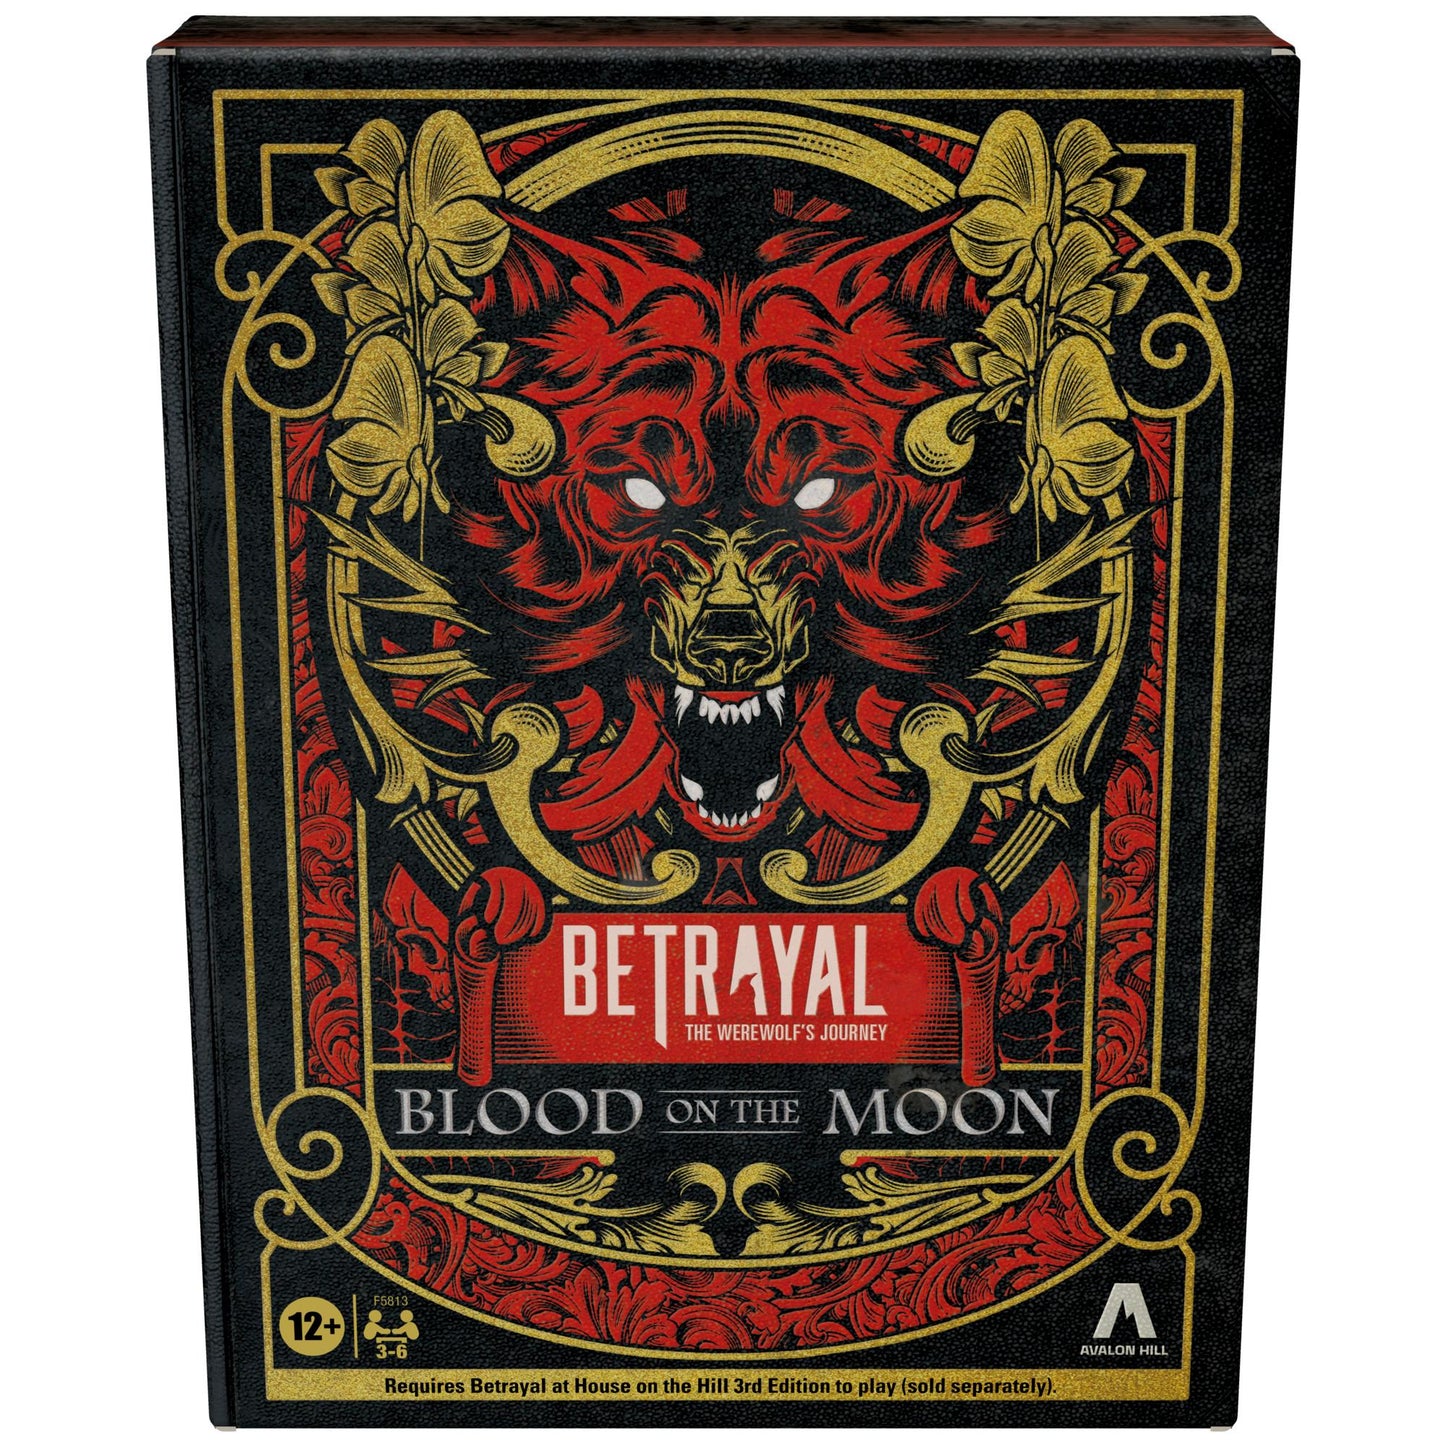 Betrayal at House on the Hill 3E: The Werewolf's Journey-Blood on the Moon Expansion